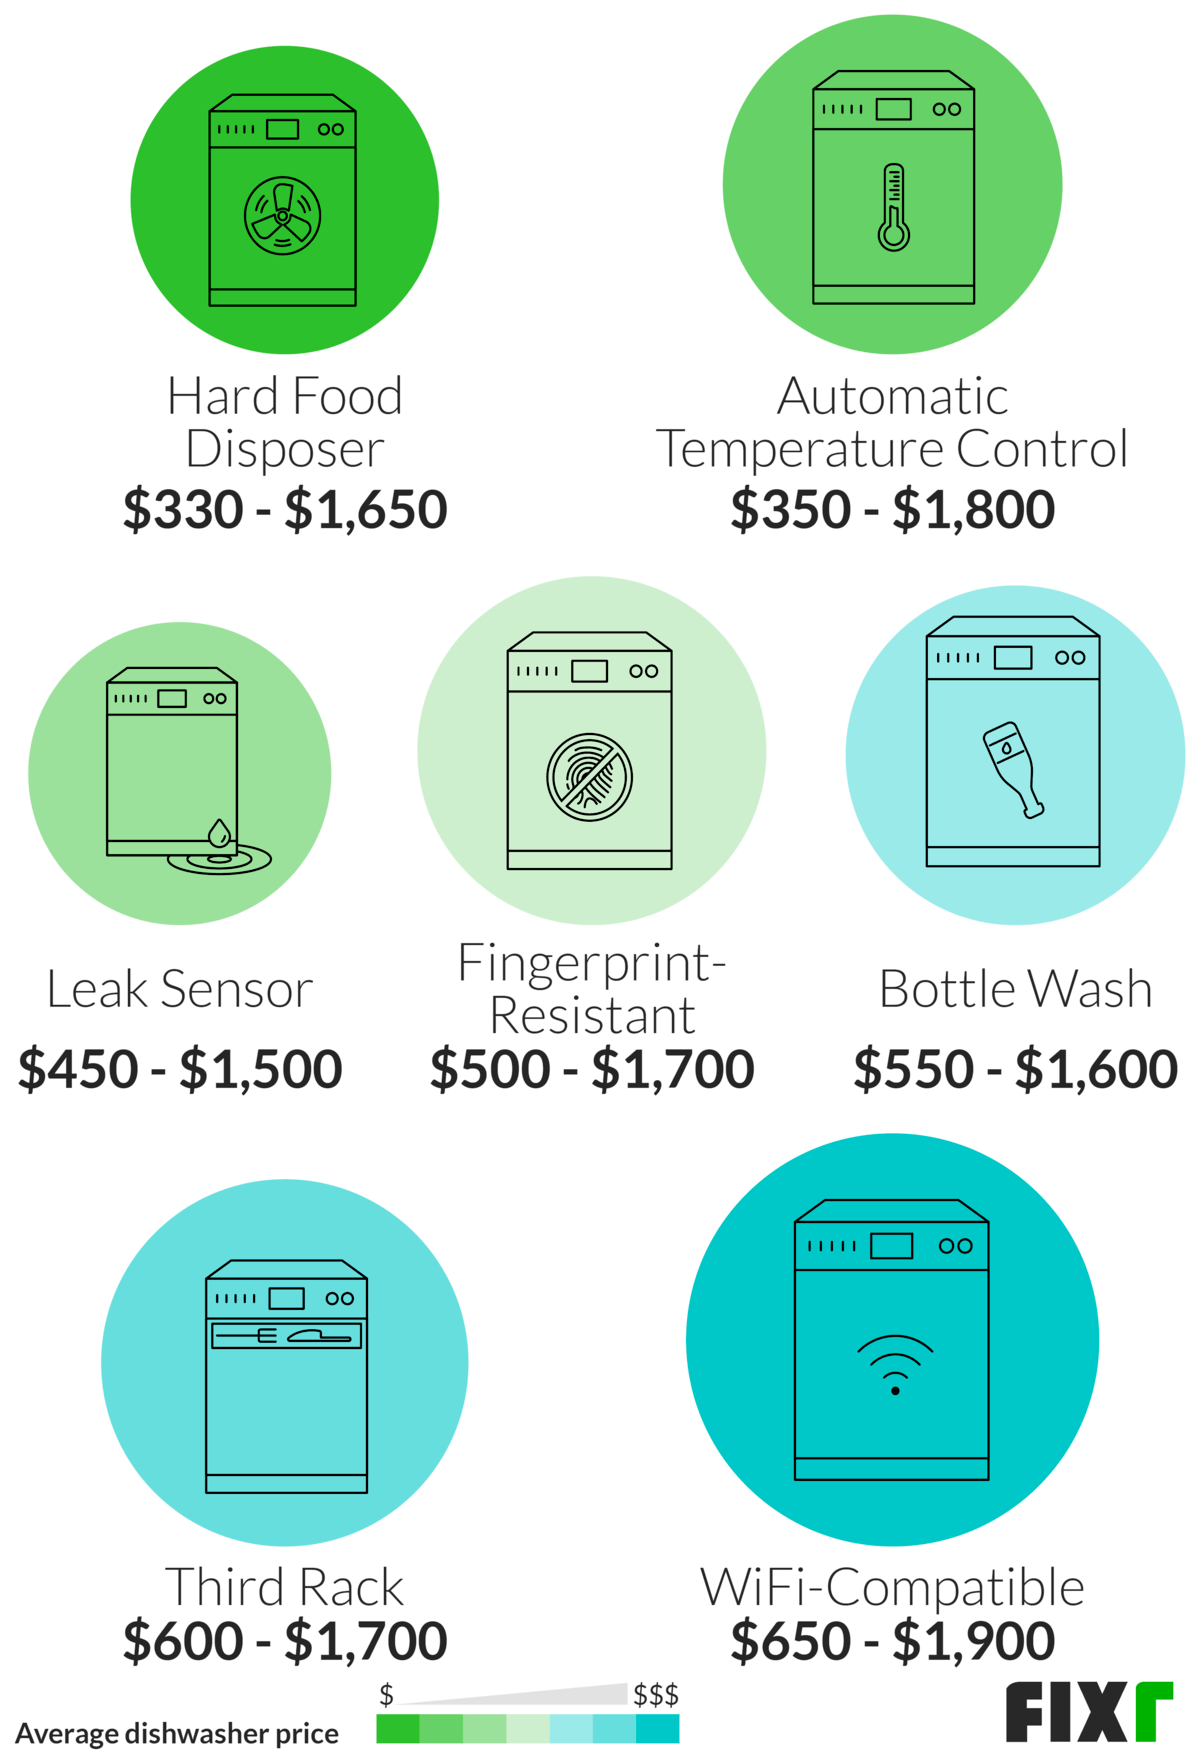 Cost of Dishwasher Special Features by Type: Hard Food Disposer, Automatic Temperature Control, Leak Sensor, Fingerprint-Resistant, Bottle Wash...